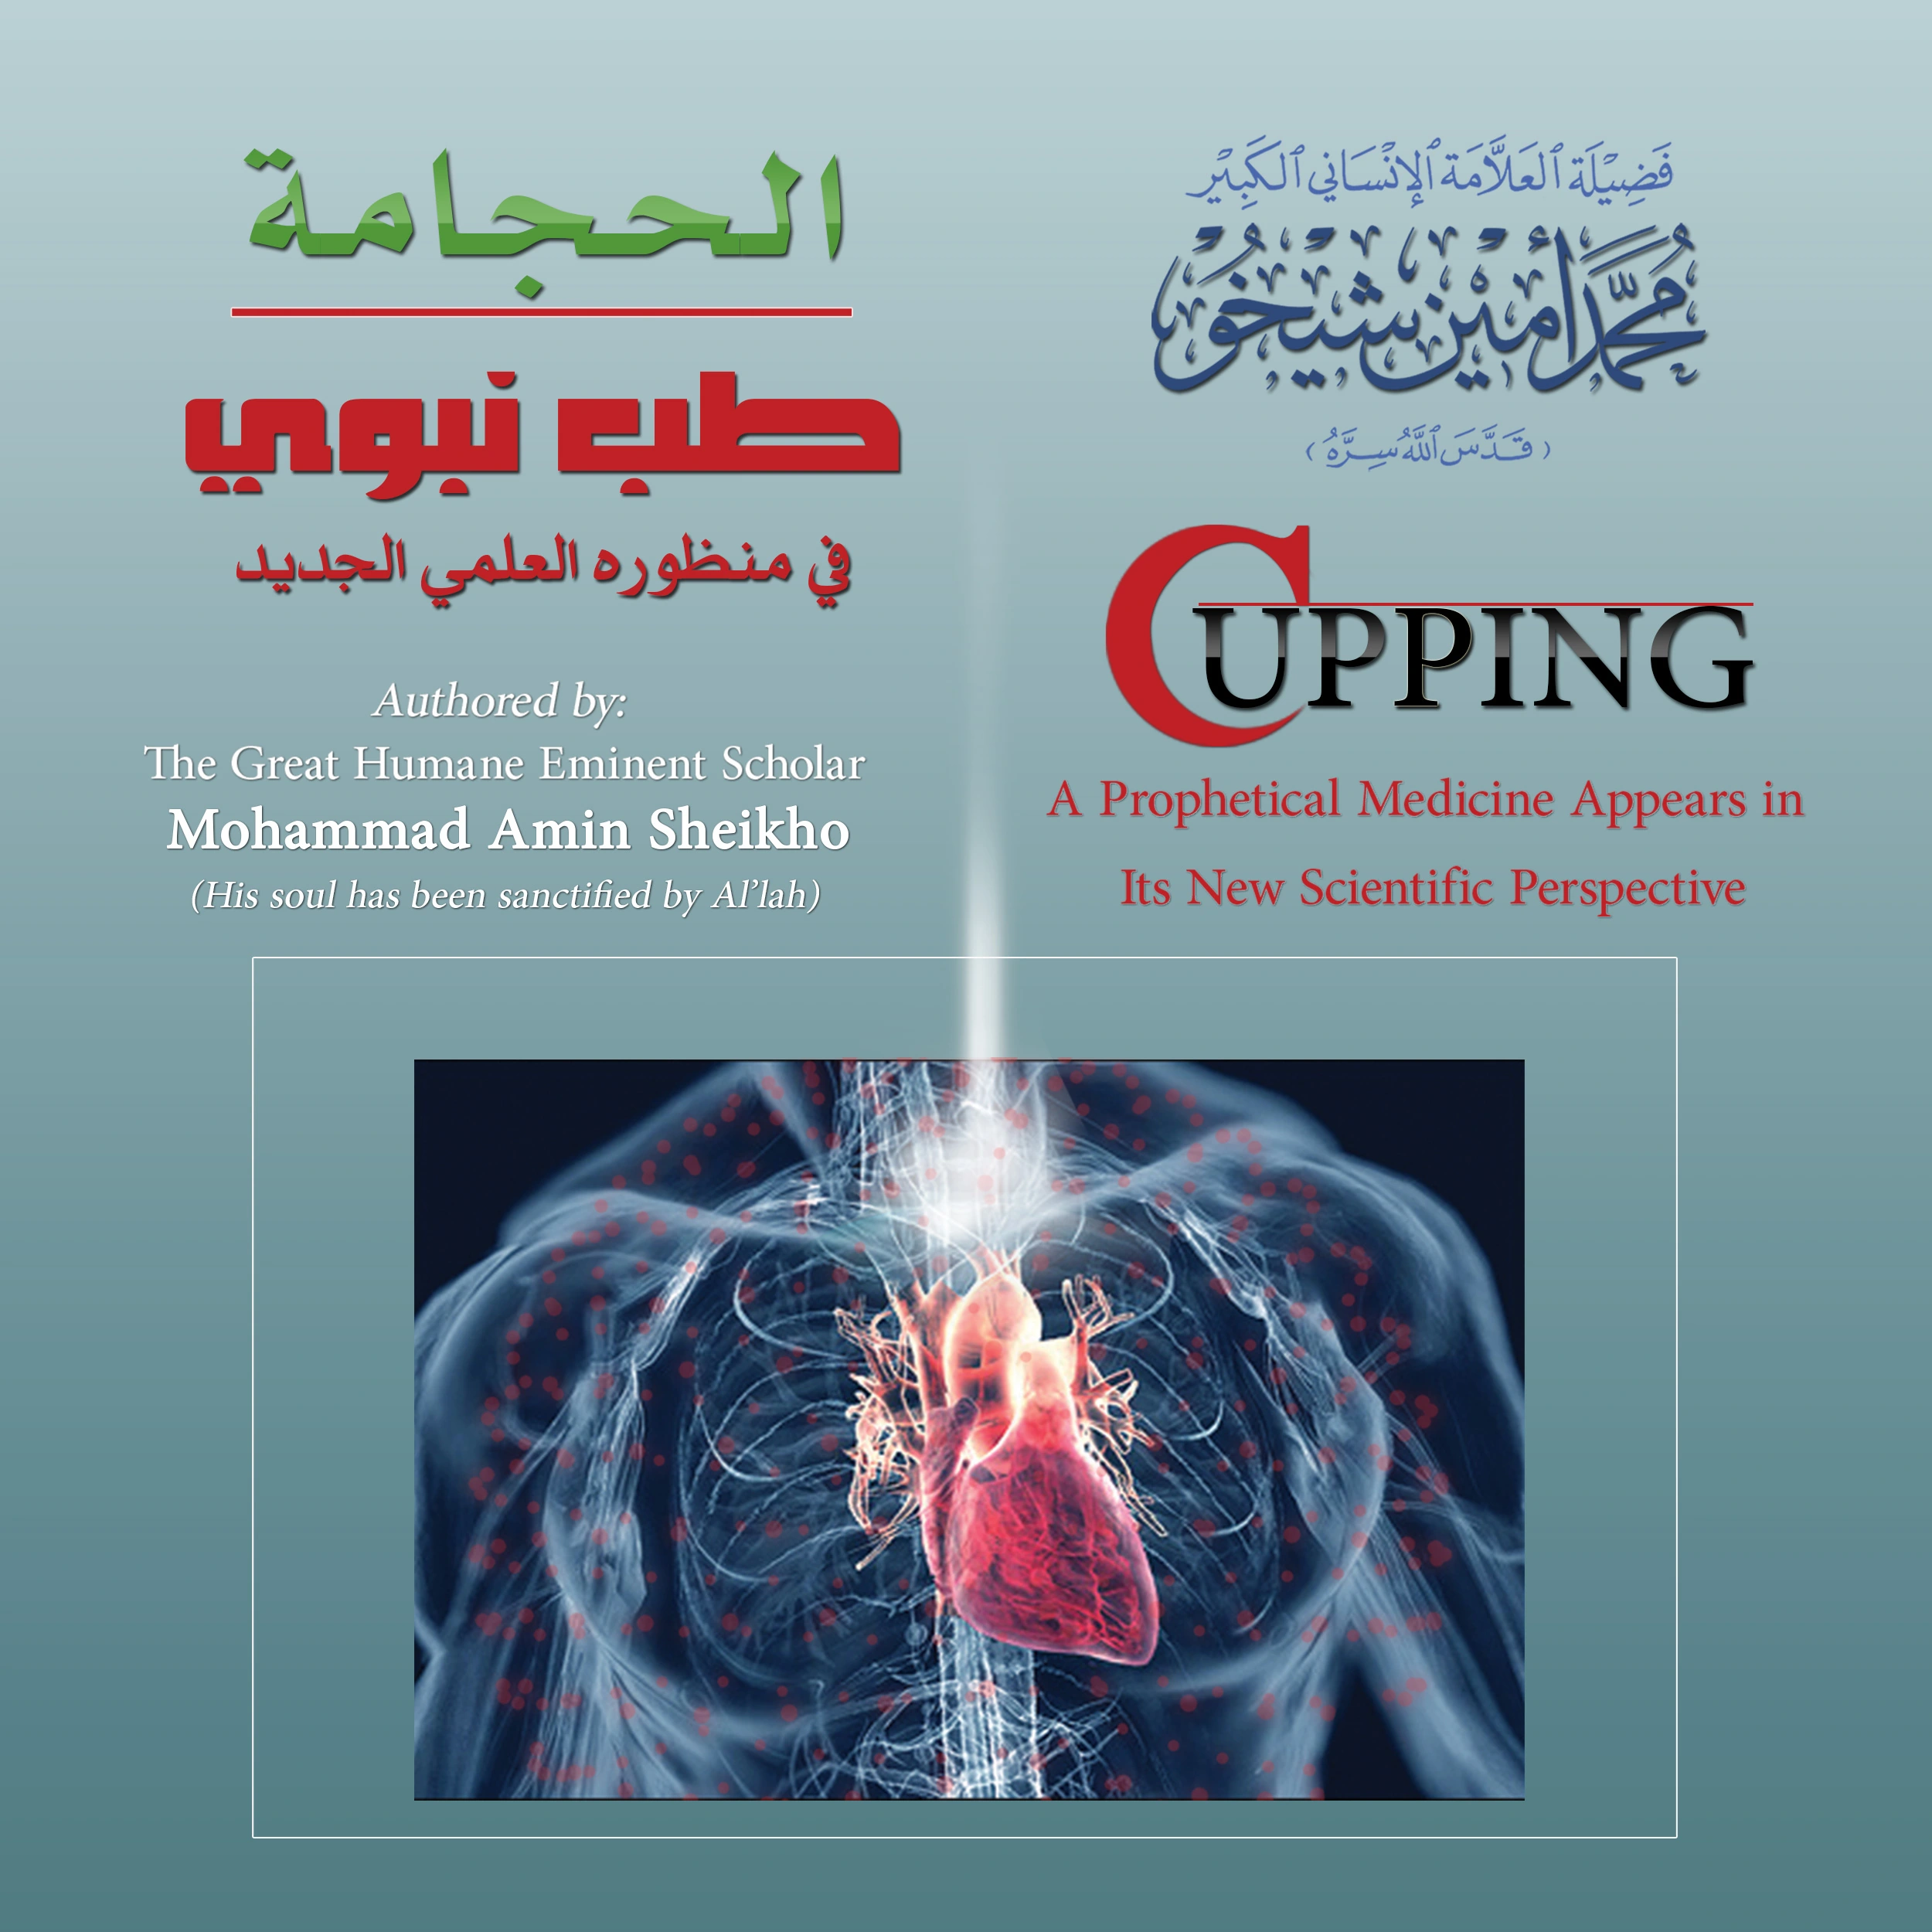 Cupping: A prophetical medicine appears in its new scientific perspective Audiobook by Mohammad Amin Sheikho